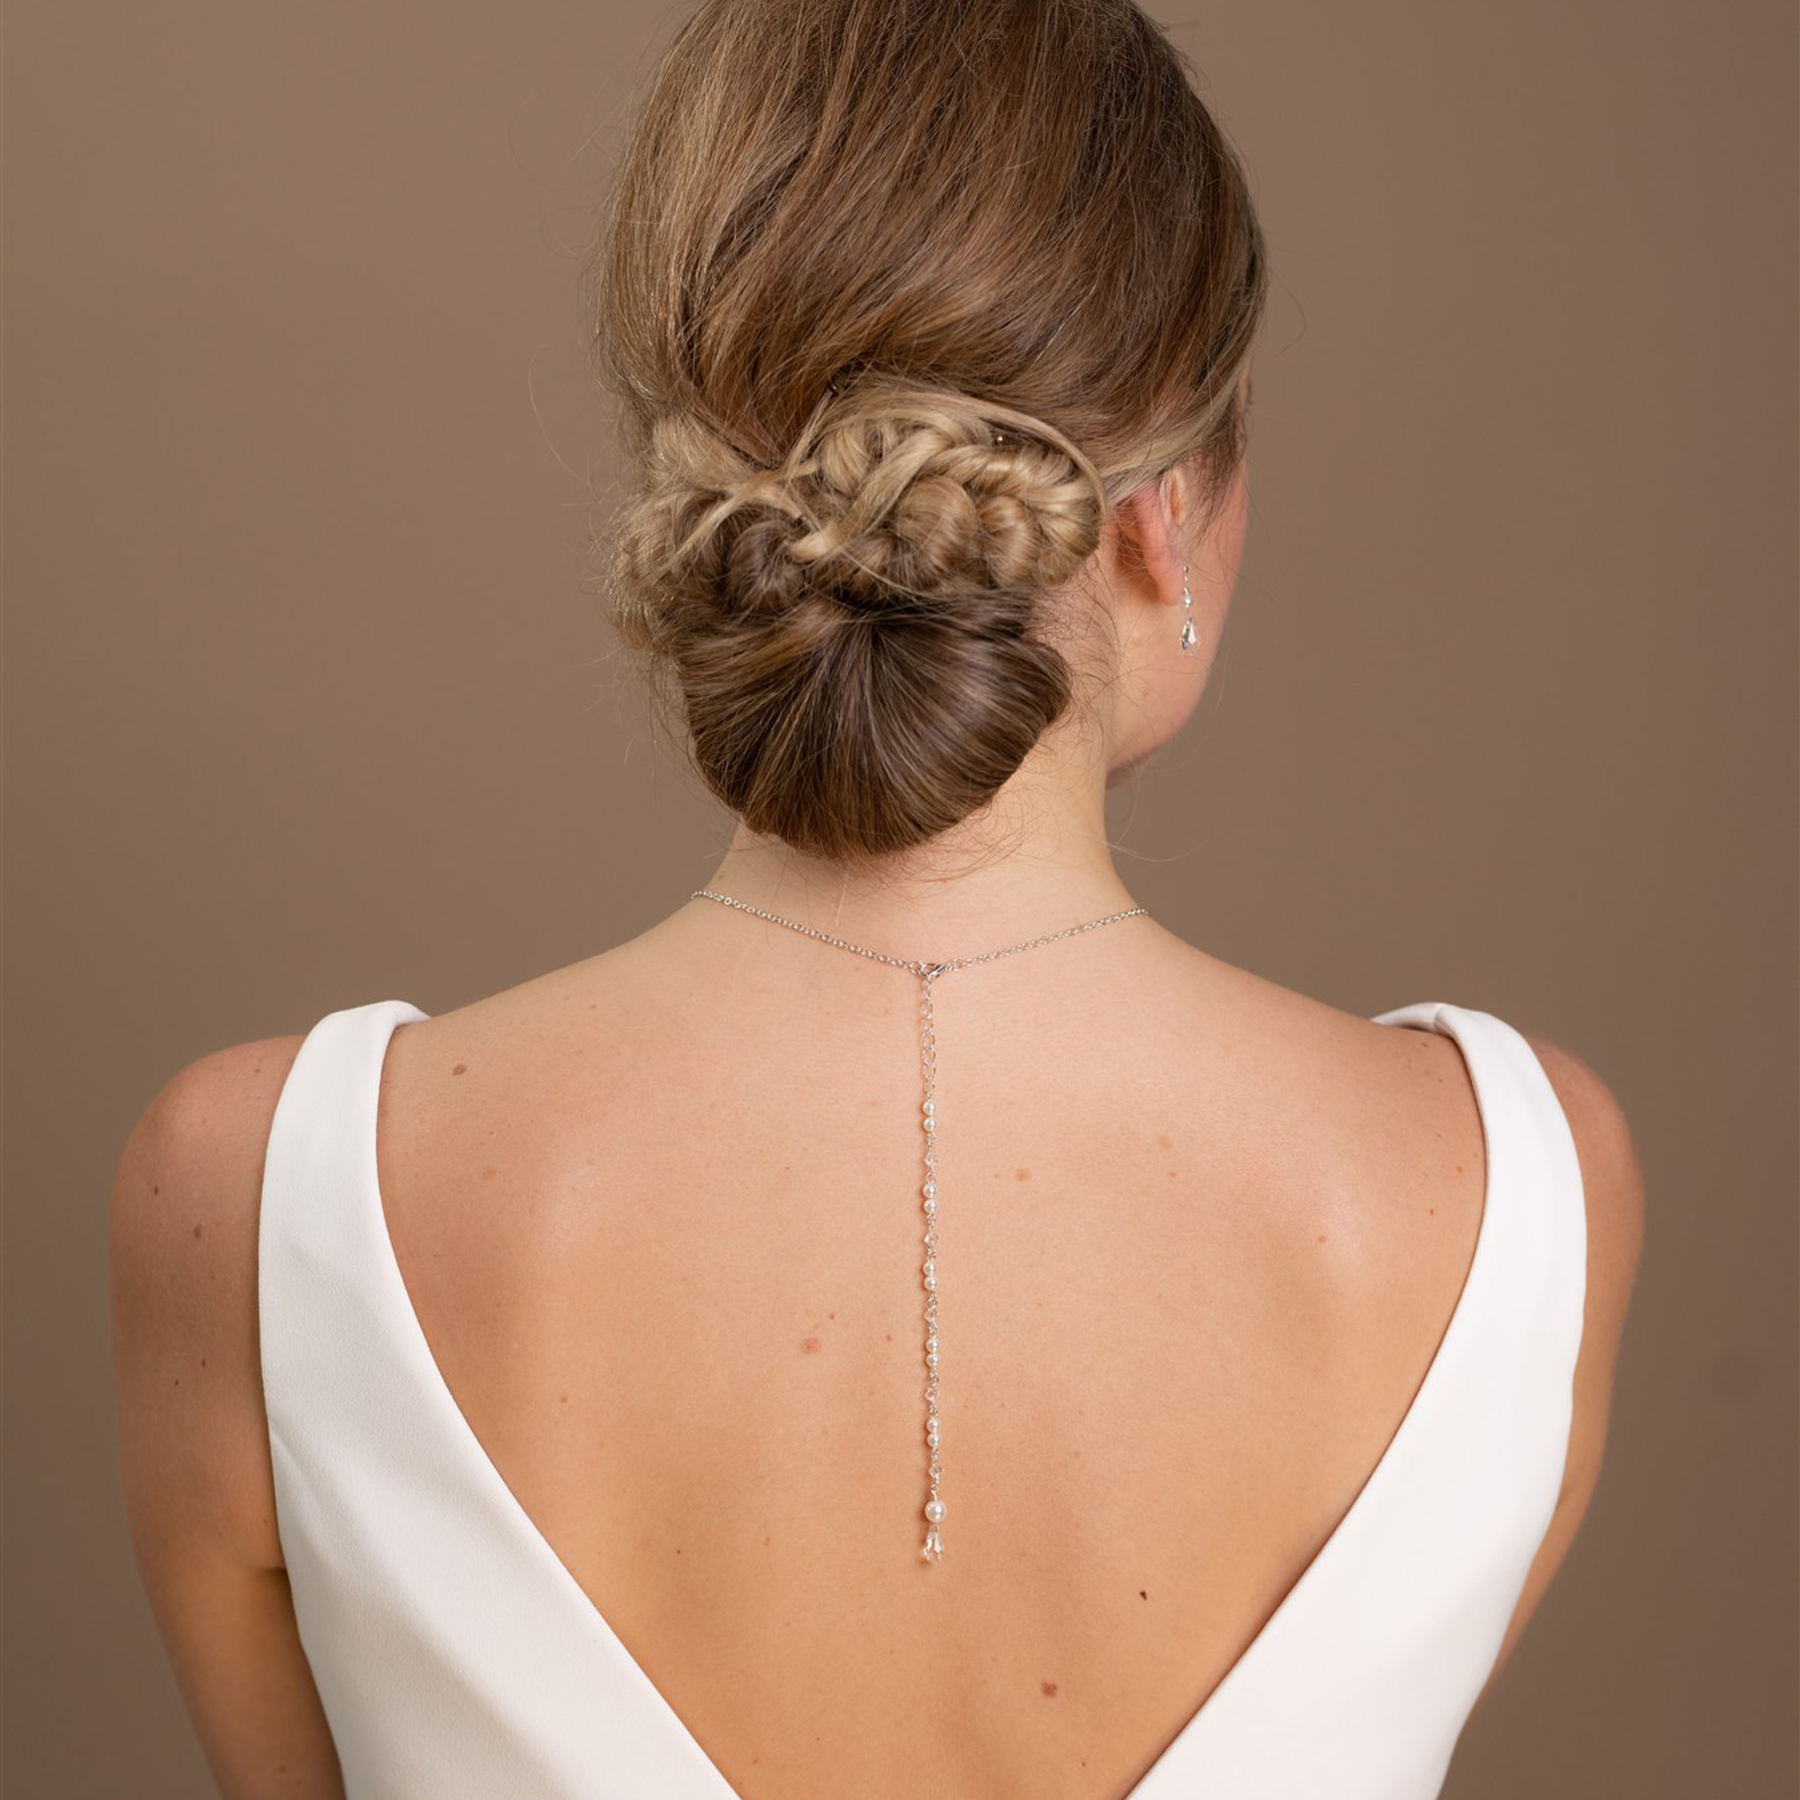 Back Necklaces: The perfect accessory for low back wedding dresses – Sabina  Motasem